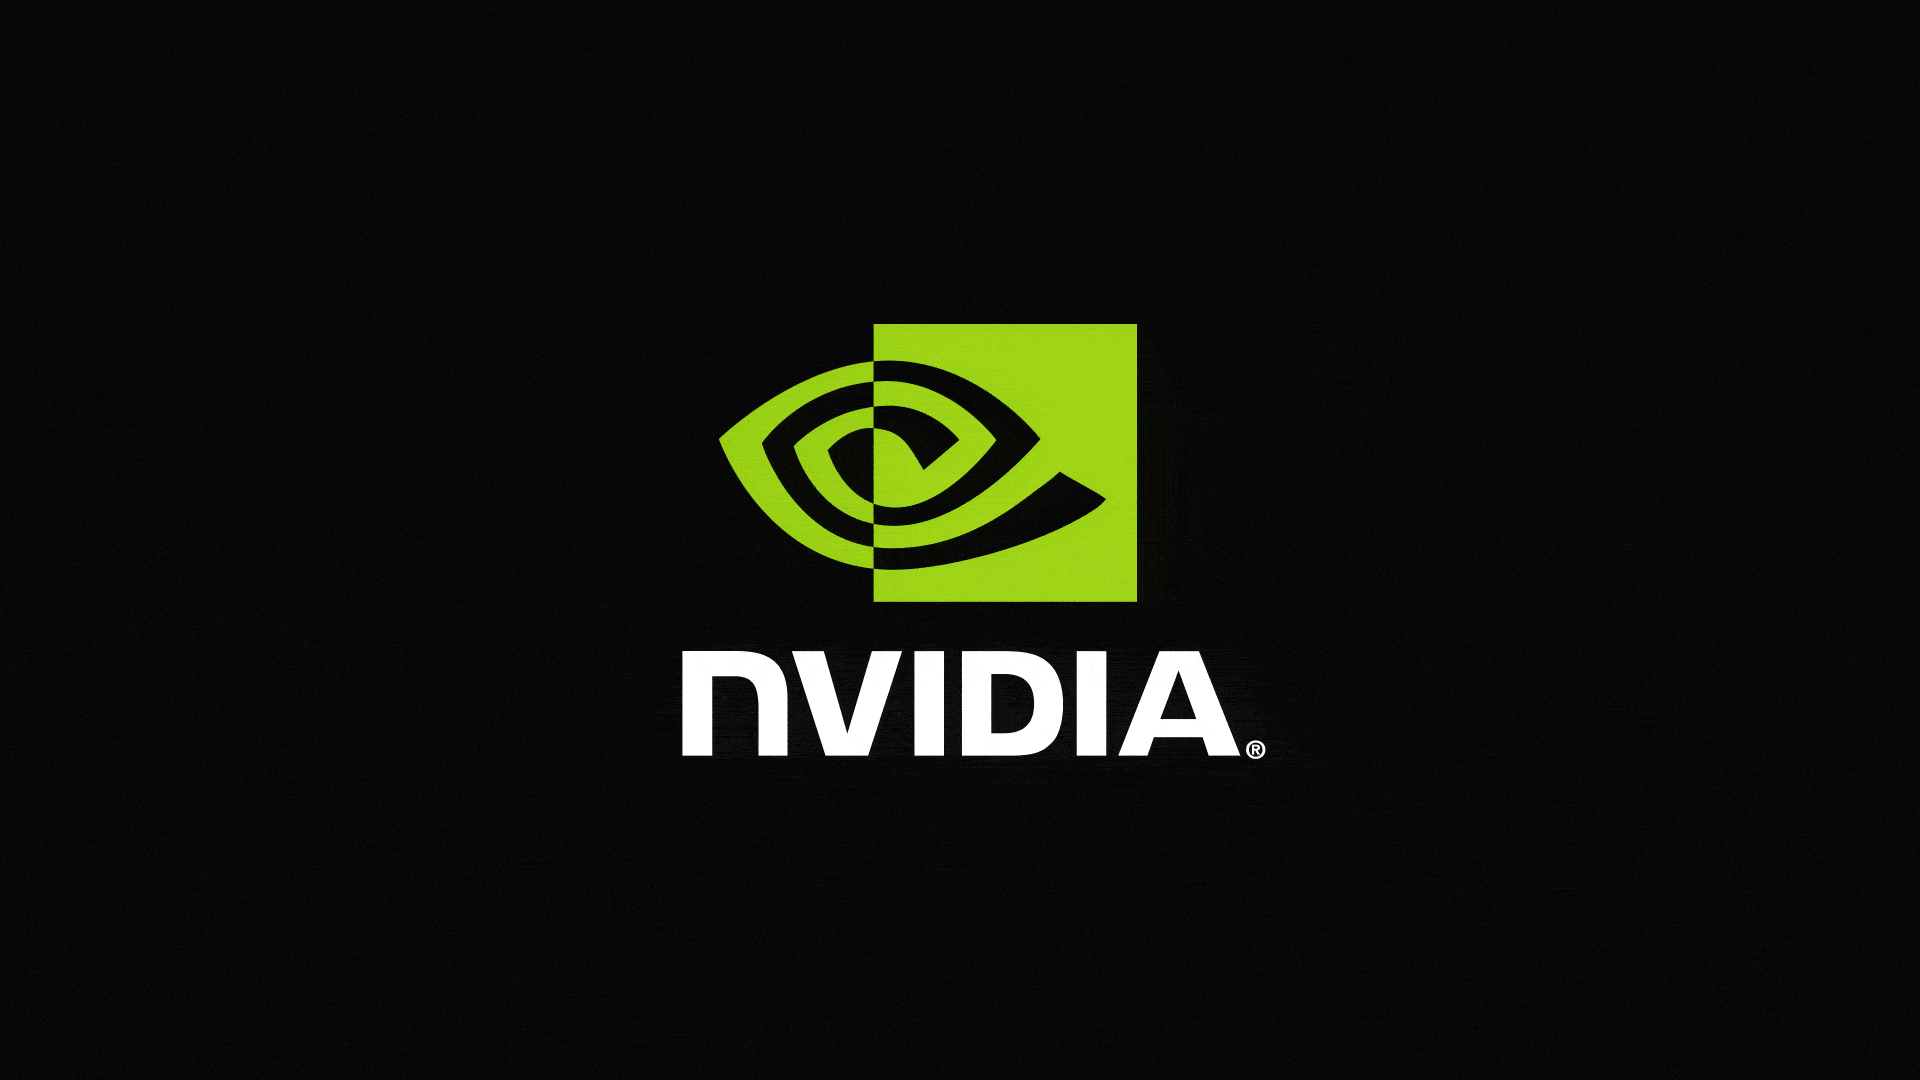 NVIDIA Logo Animation 2d animations ae after effects animated logo animation branding concept animation icon animation logo logo animation logo intro logo reveal motion motion design motion graphics pre loader